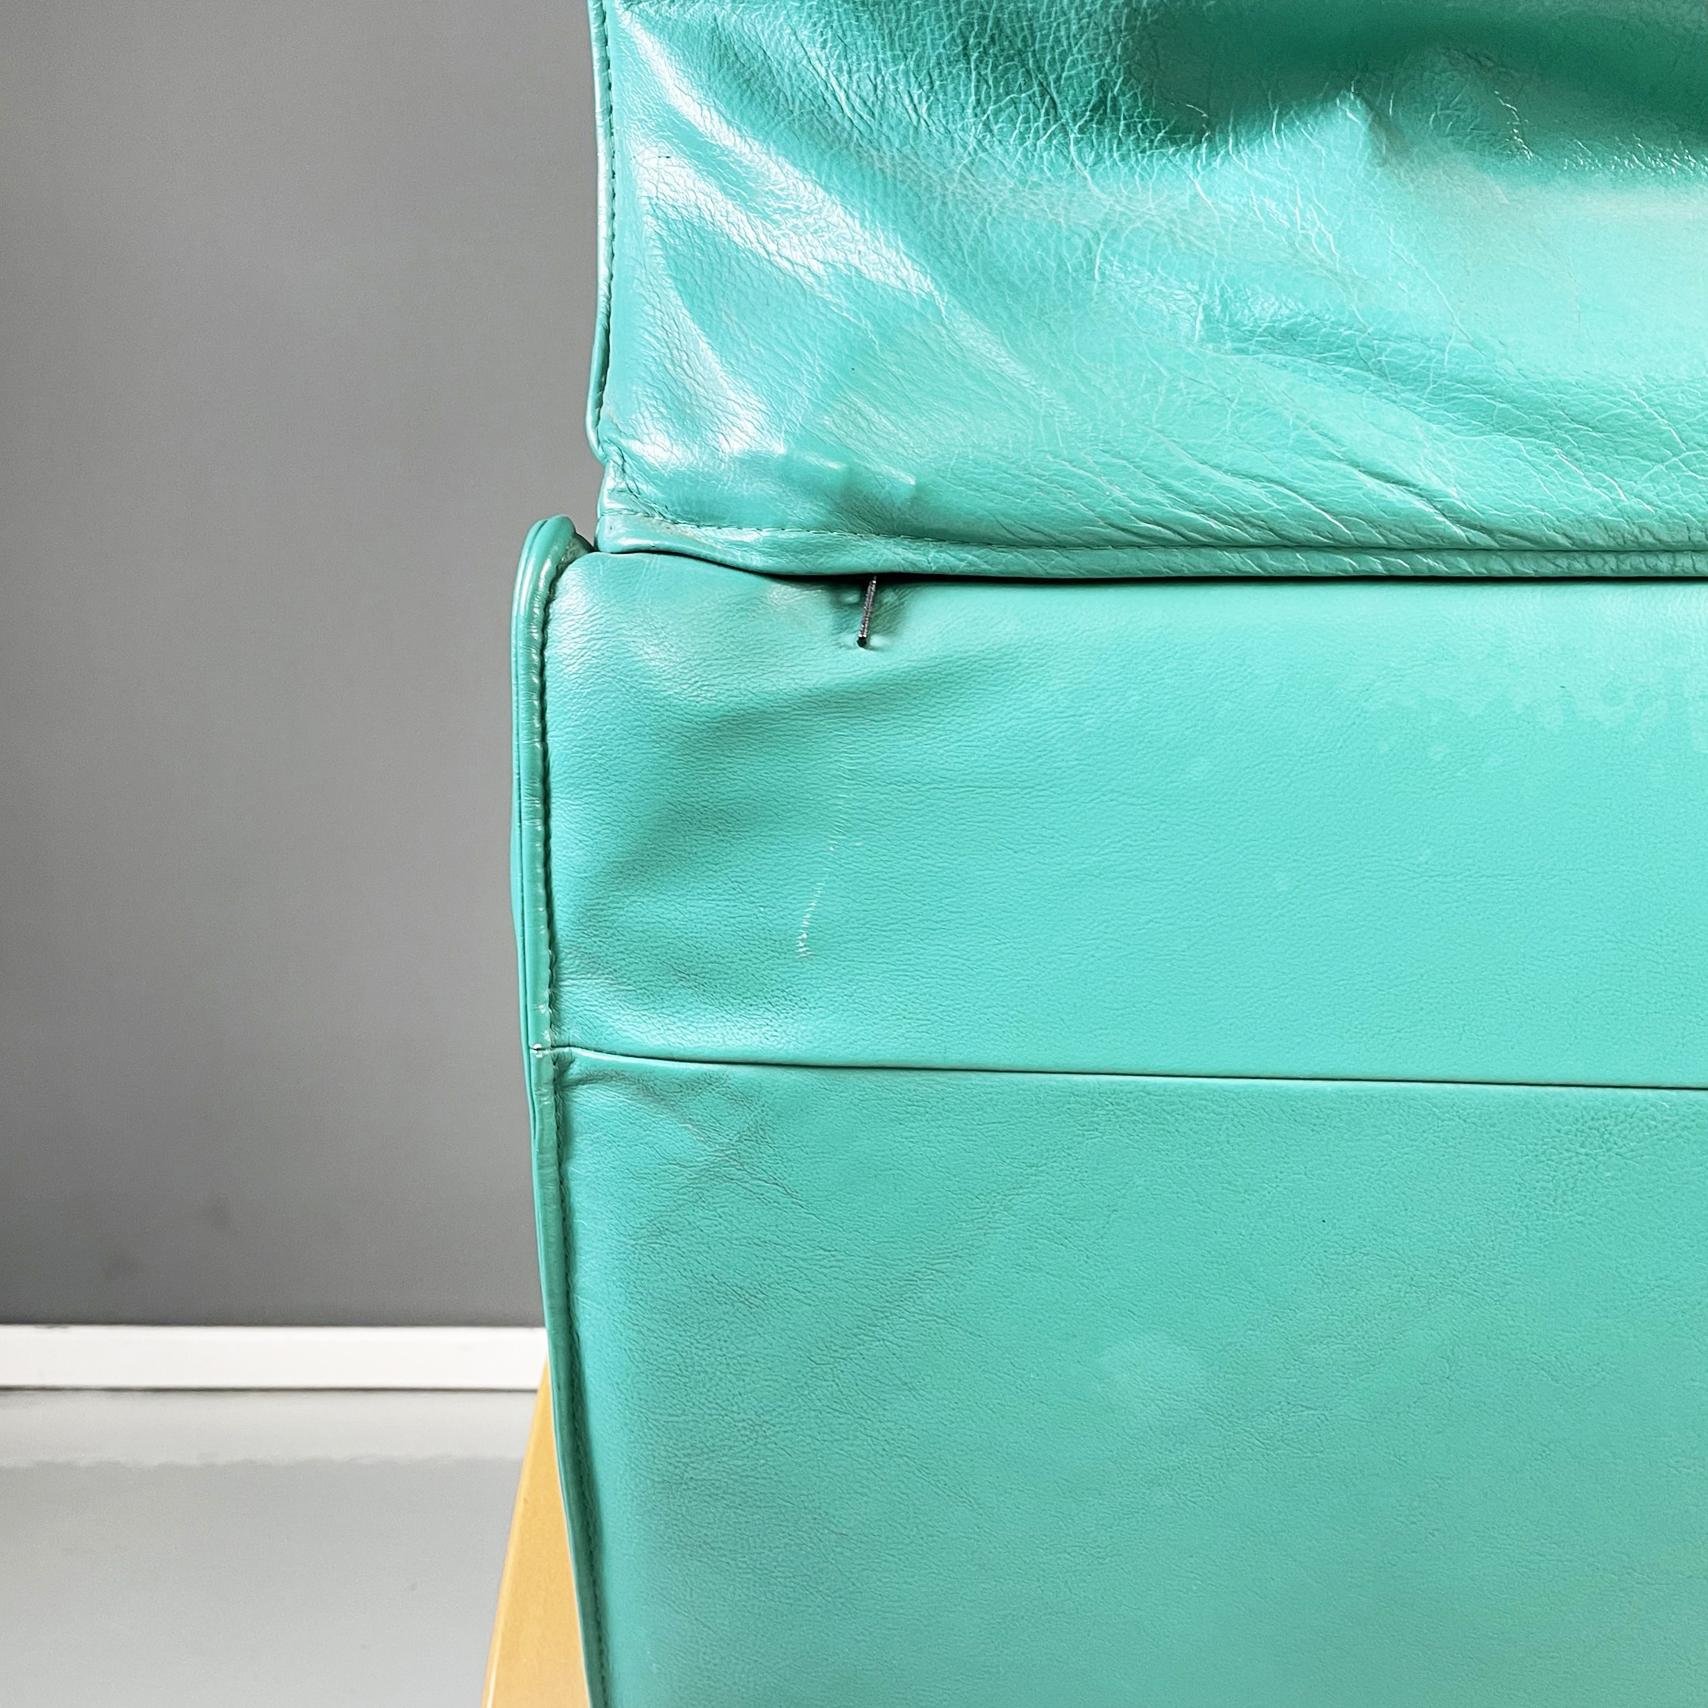 Italian Modern Armchair in Aqua-Green Leather, Wood and Metal, 1980s For Sale 12